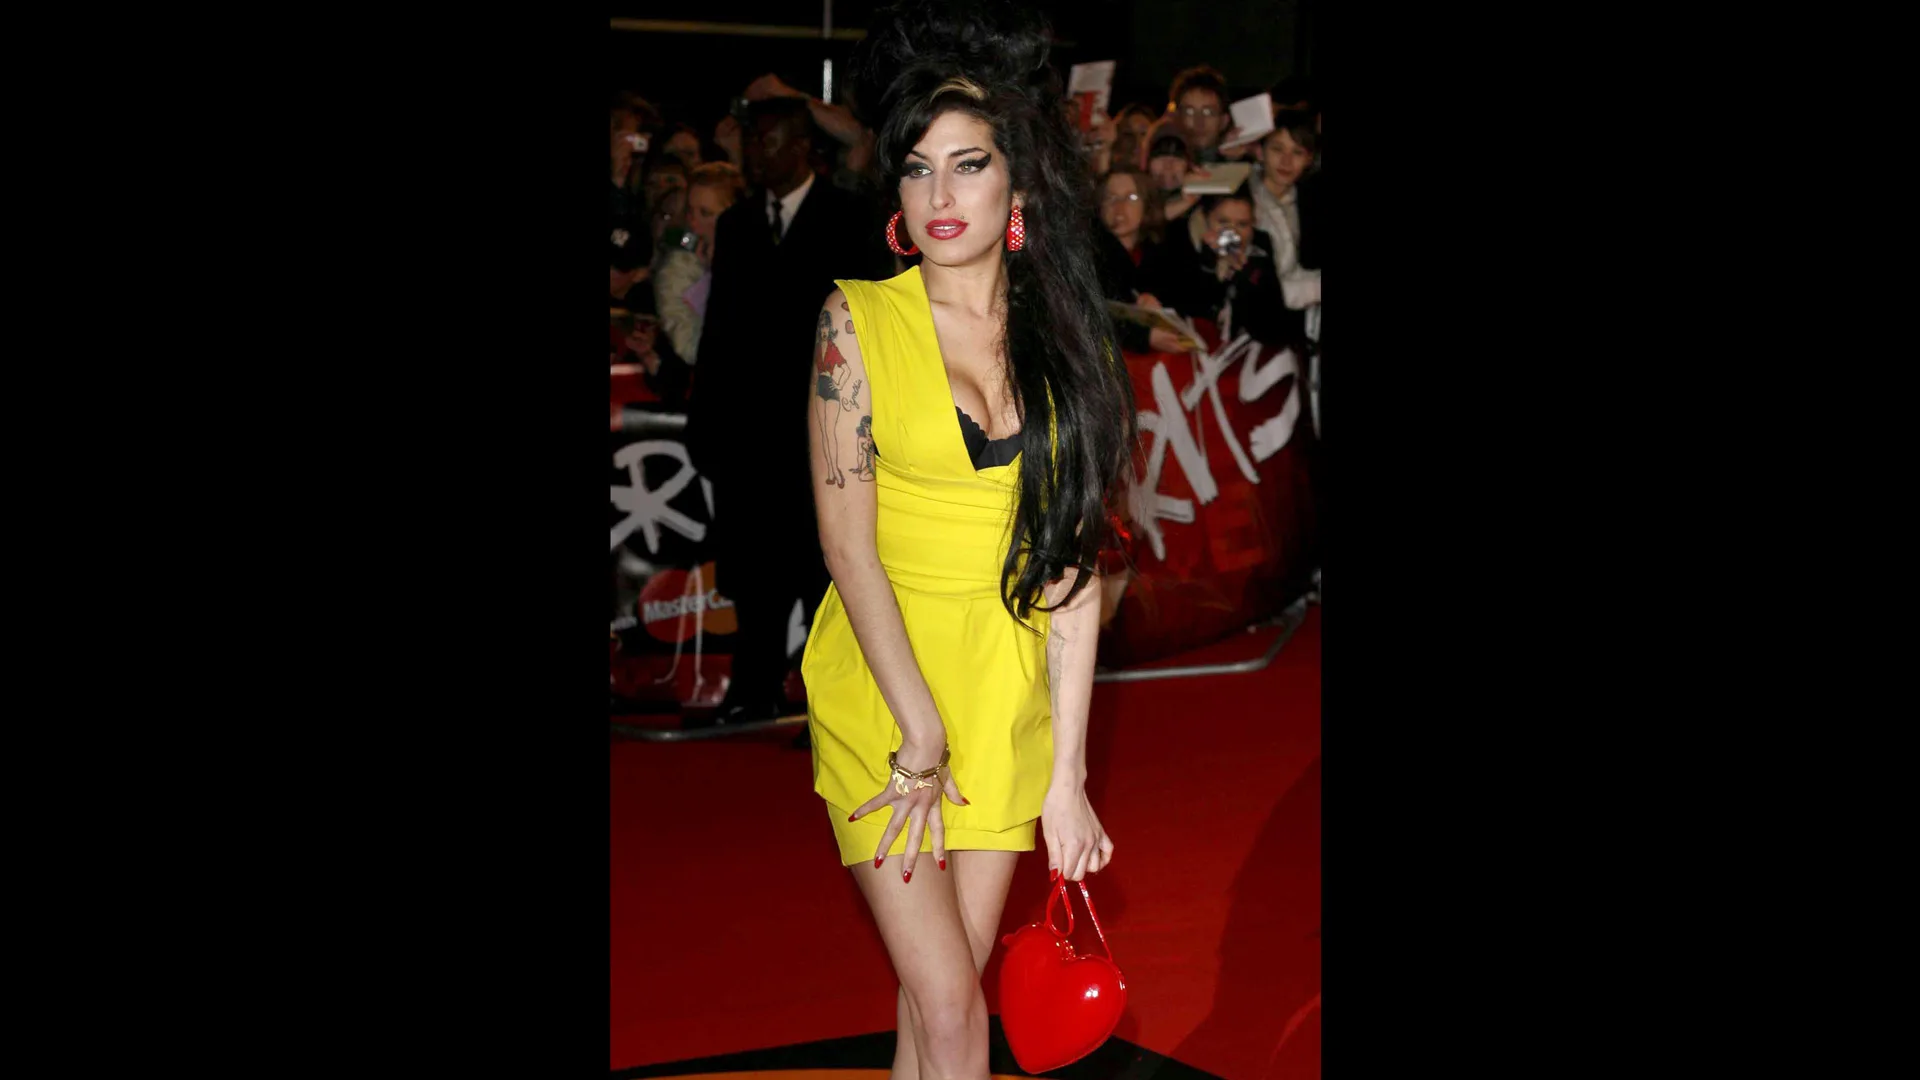 Photograph of Amy Winehouse wearing a yellow dress on the red carpet of the Brit Awards 2007